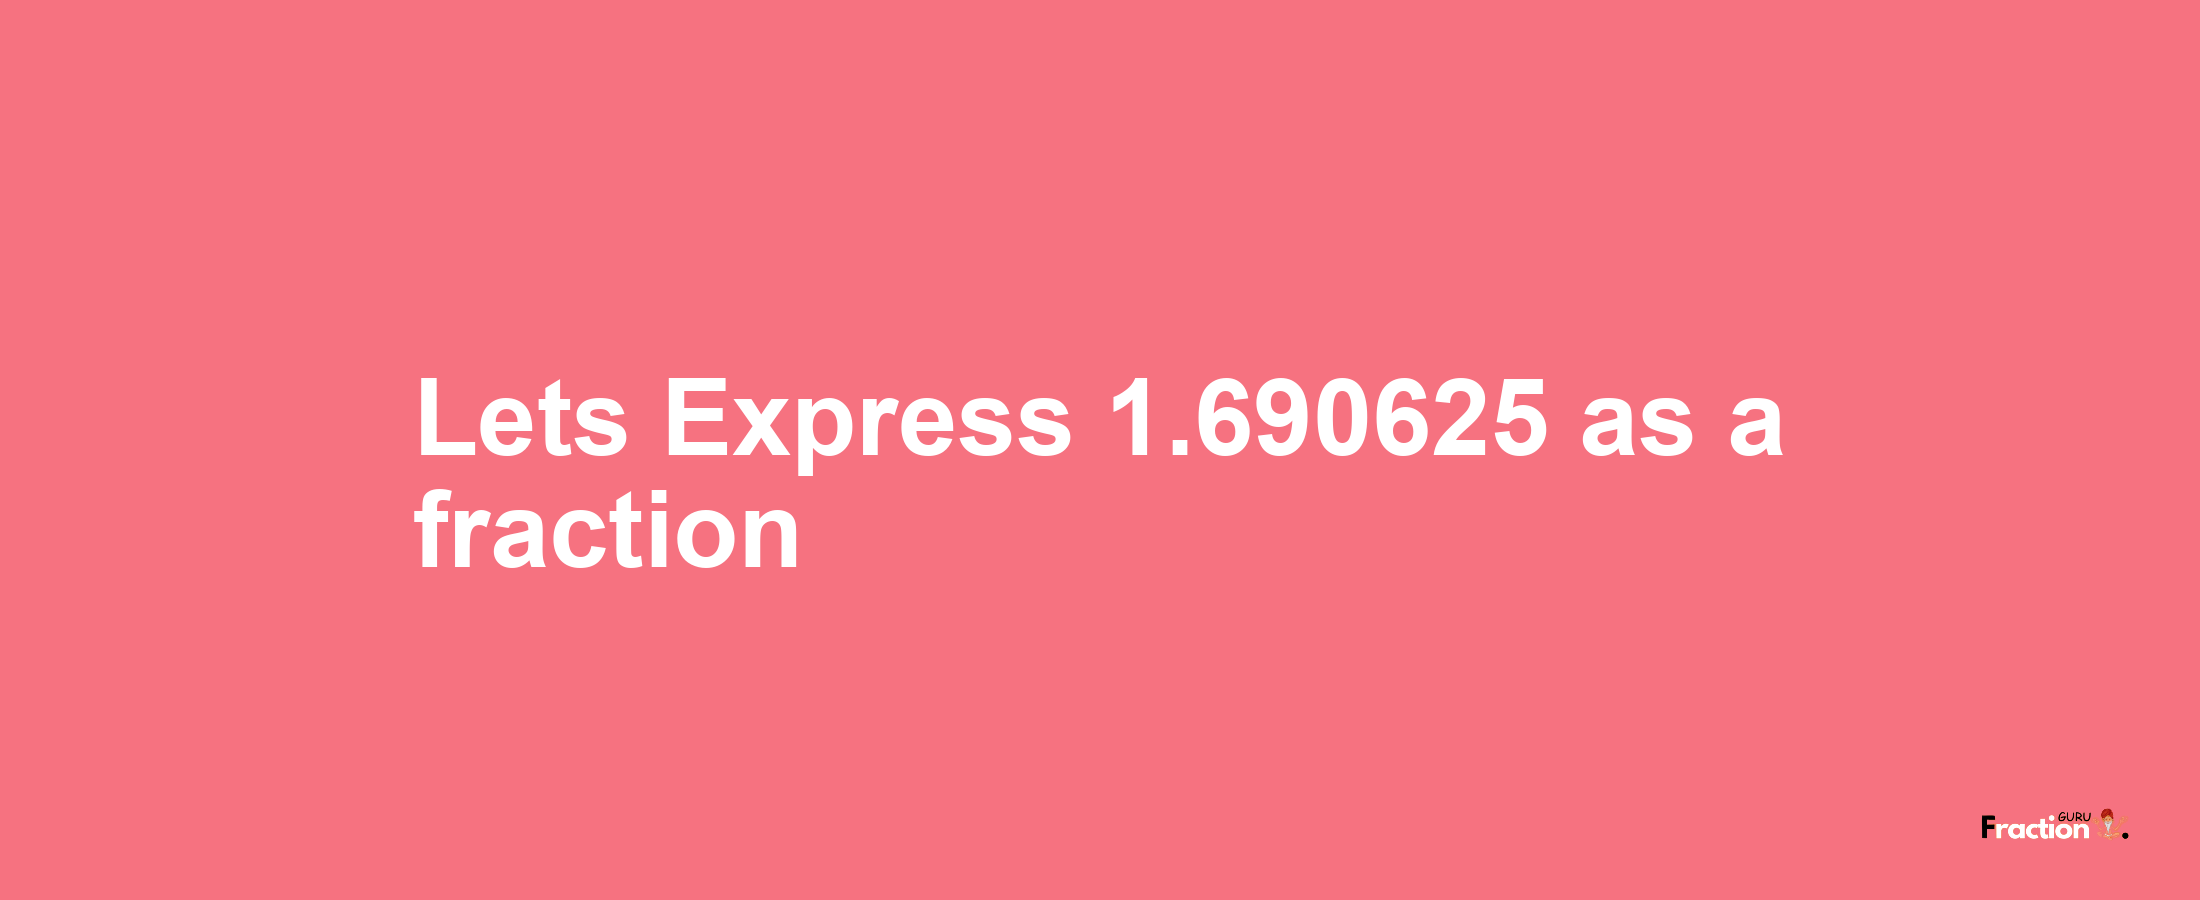 Lets Express 1.690625 as afraction